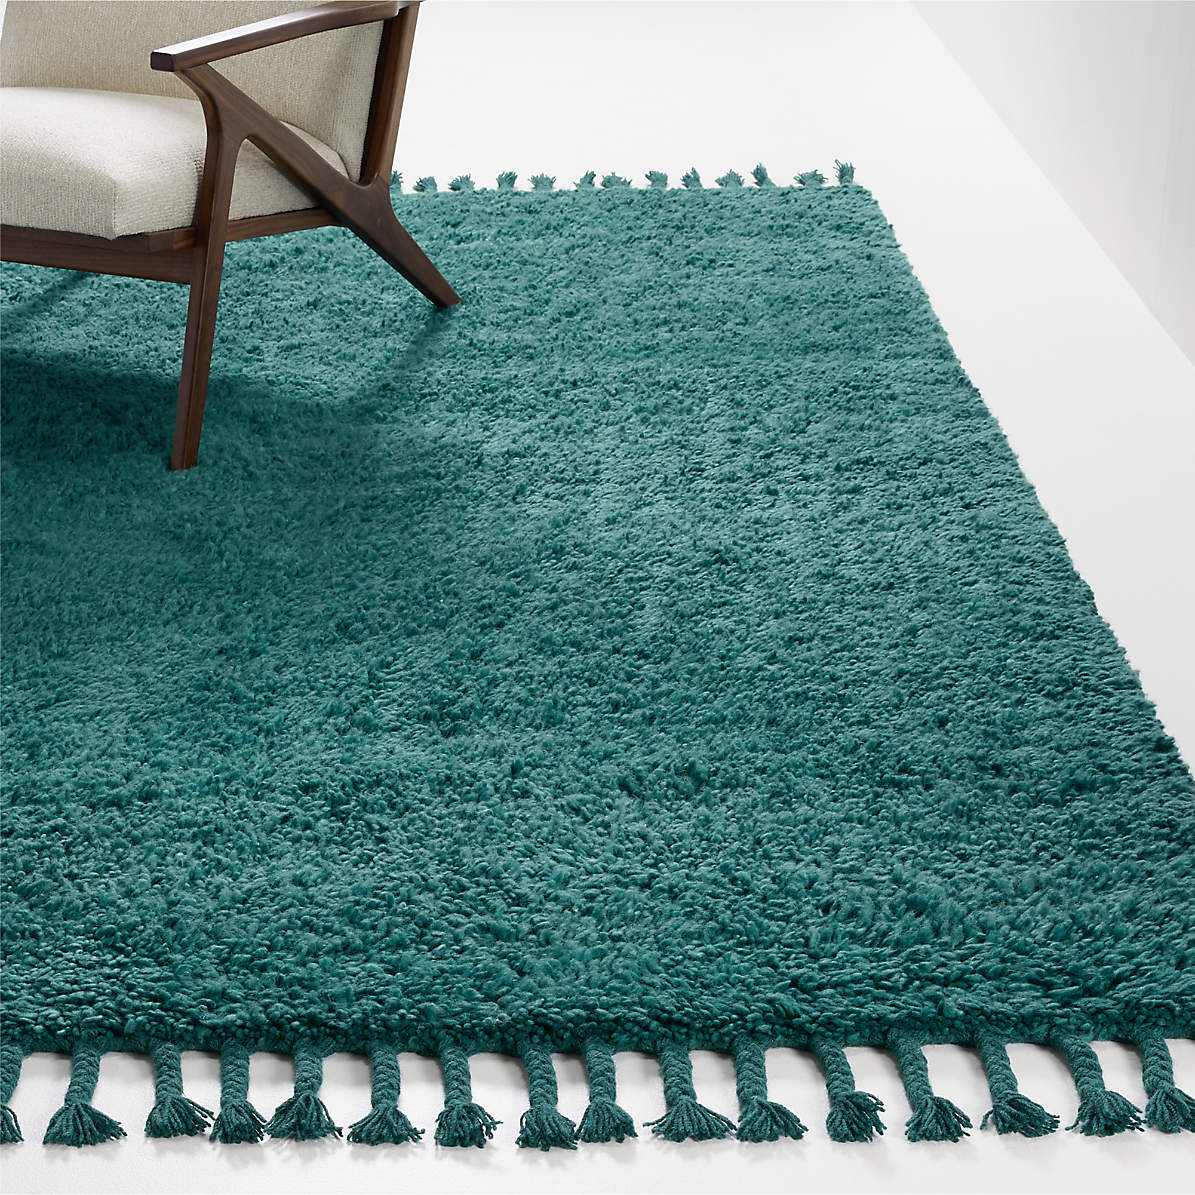 Topanga Teal Moroccan Rugs Crate And, Teal Dining Room Rug